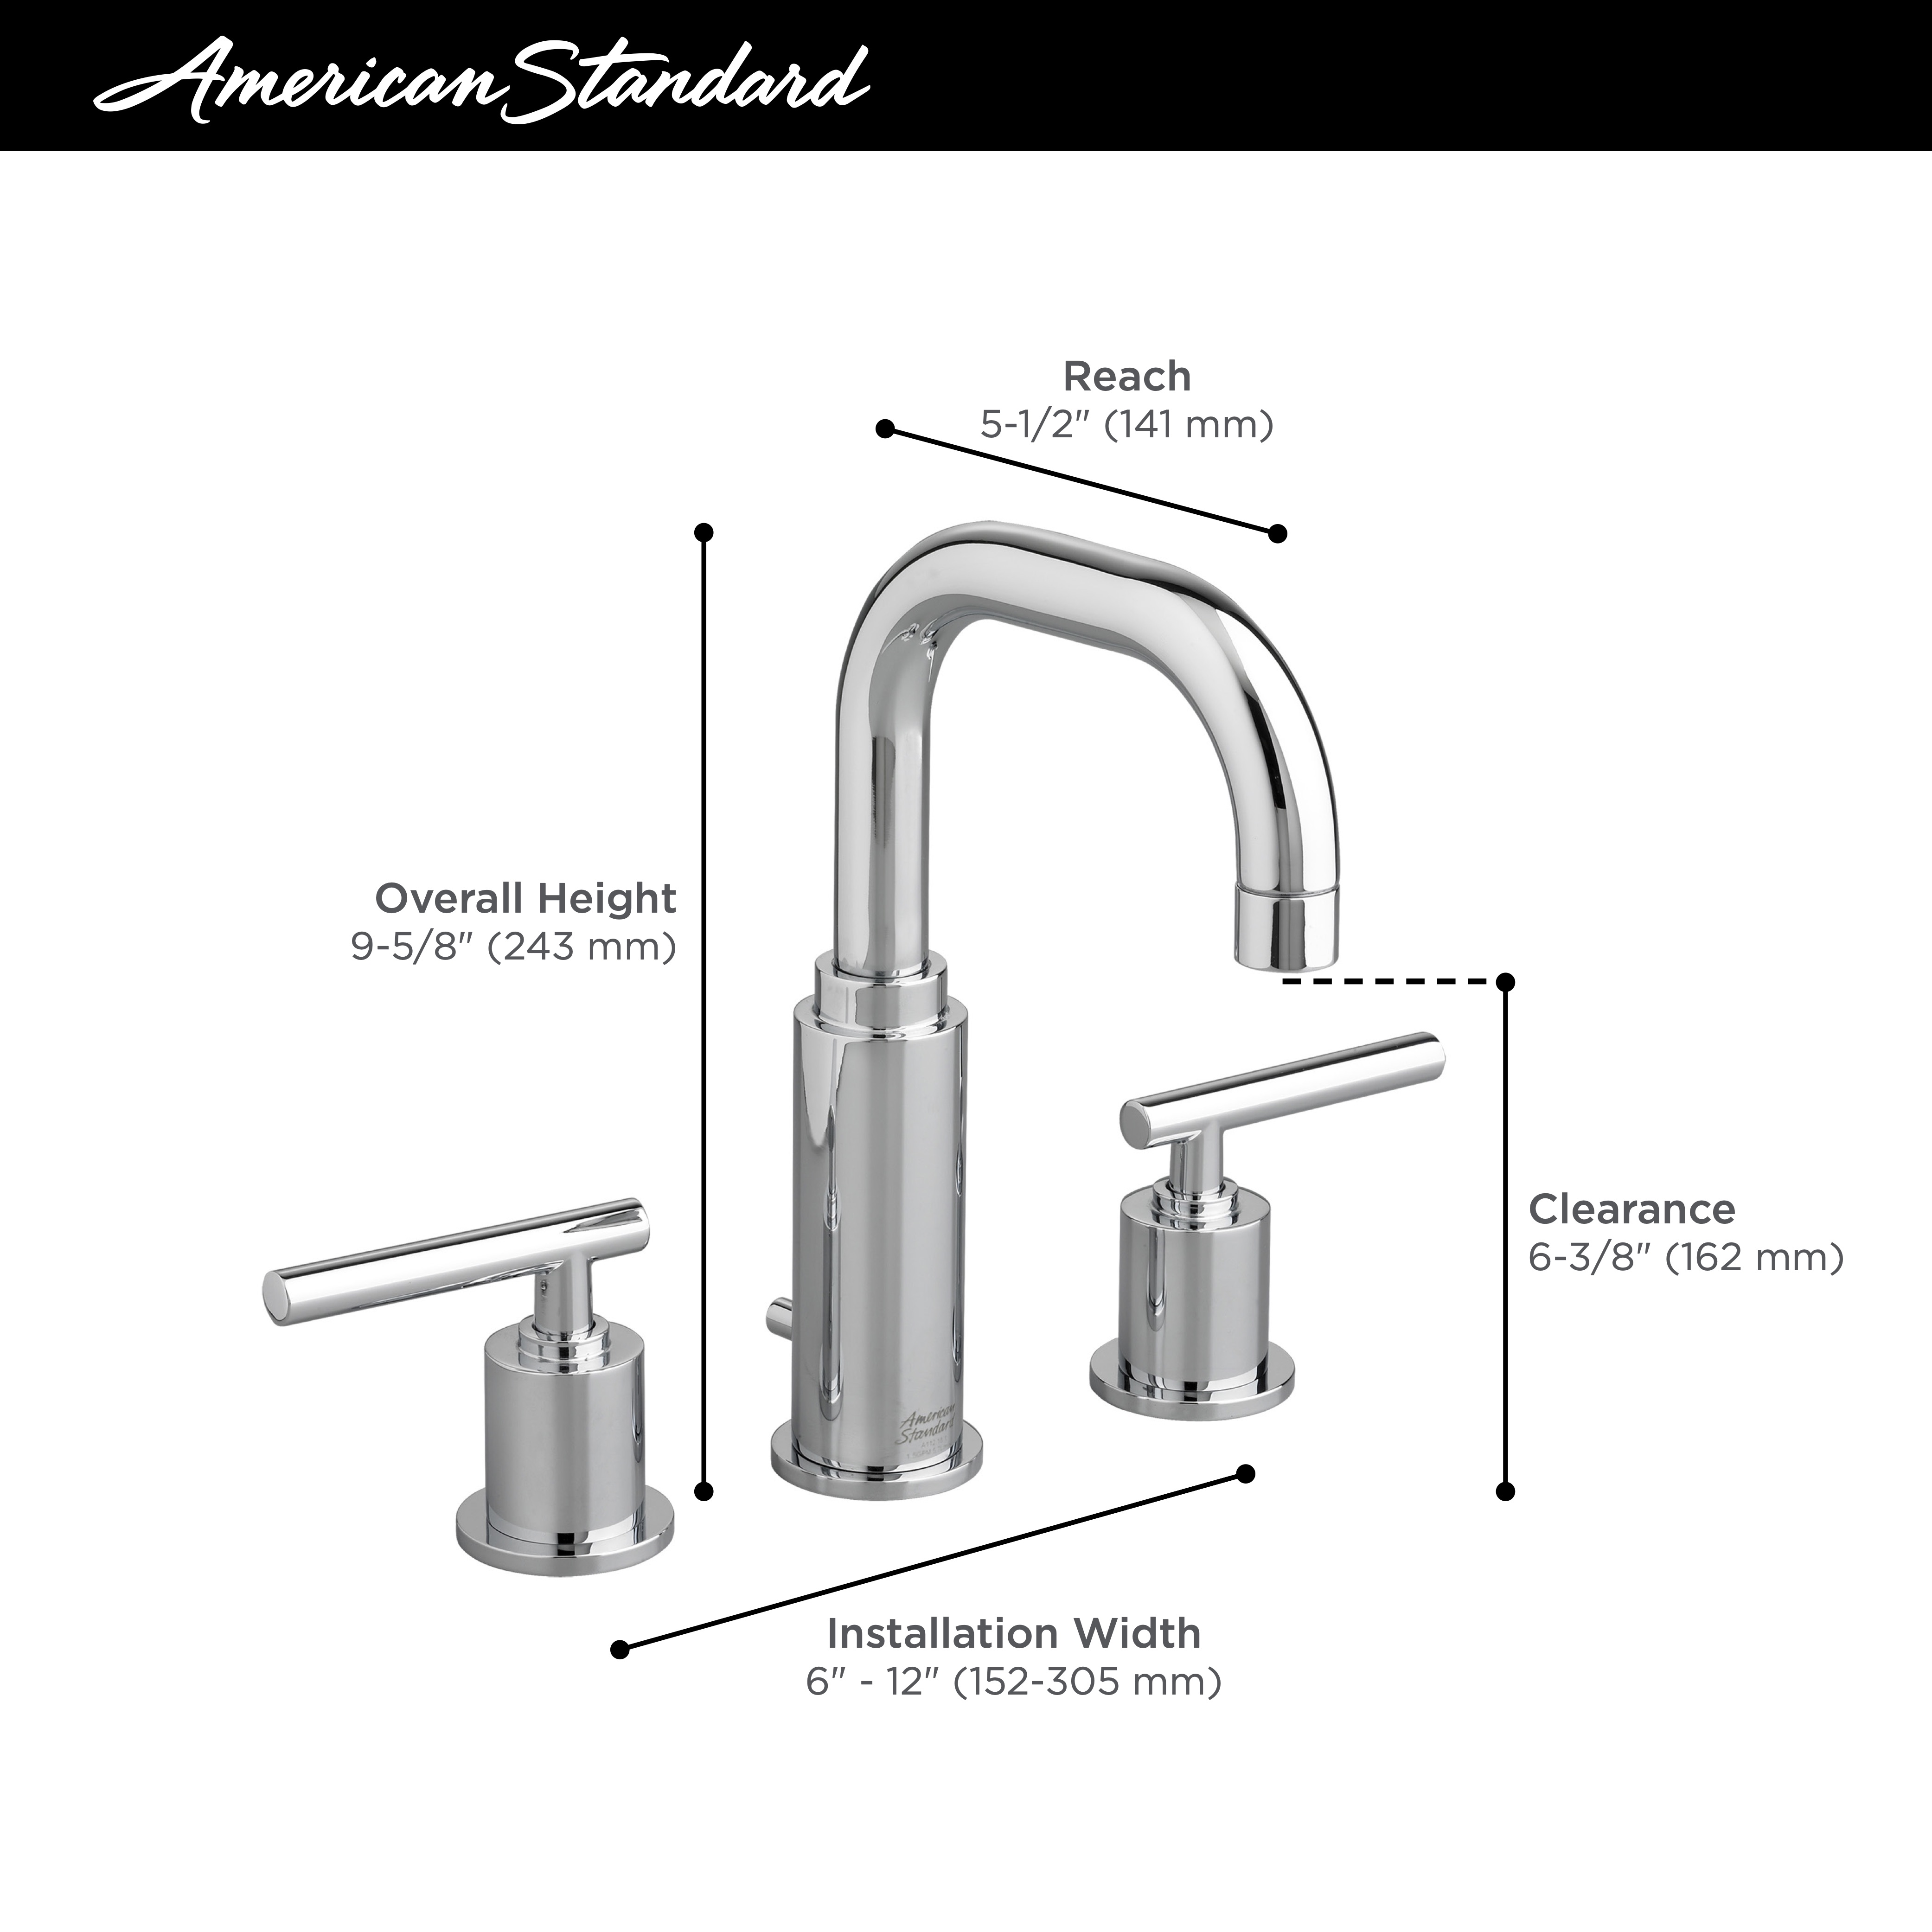 Serin® 2-Handle 8-Inch Widespread Bathroom Faucet 1.2 gpm 4.5 L/min With Lever Handles